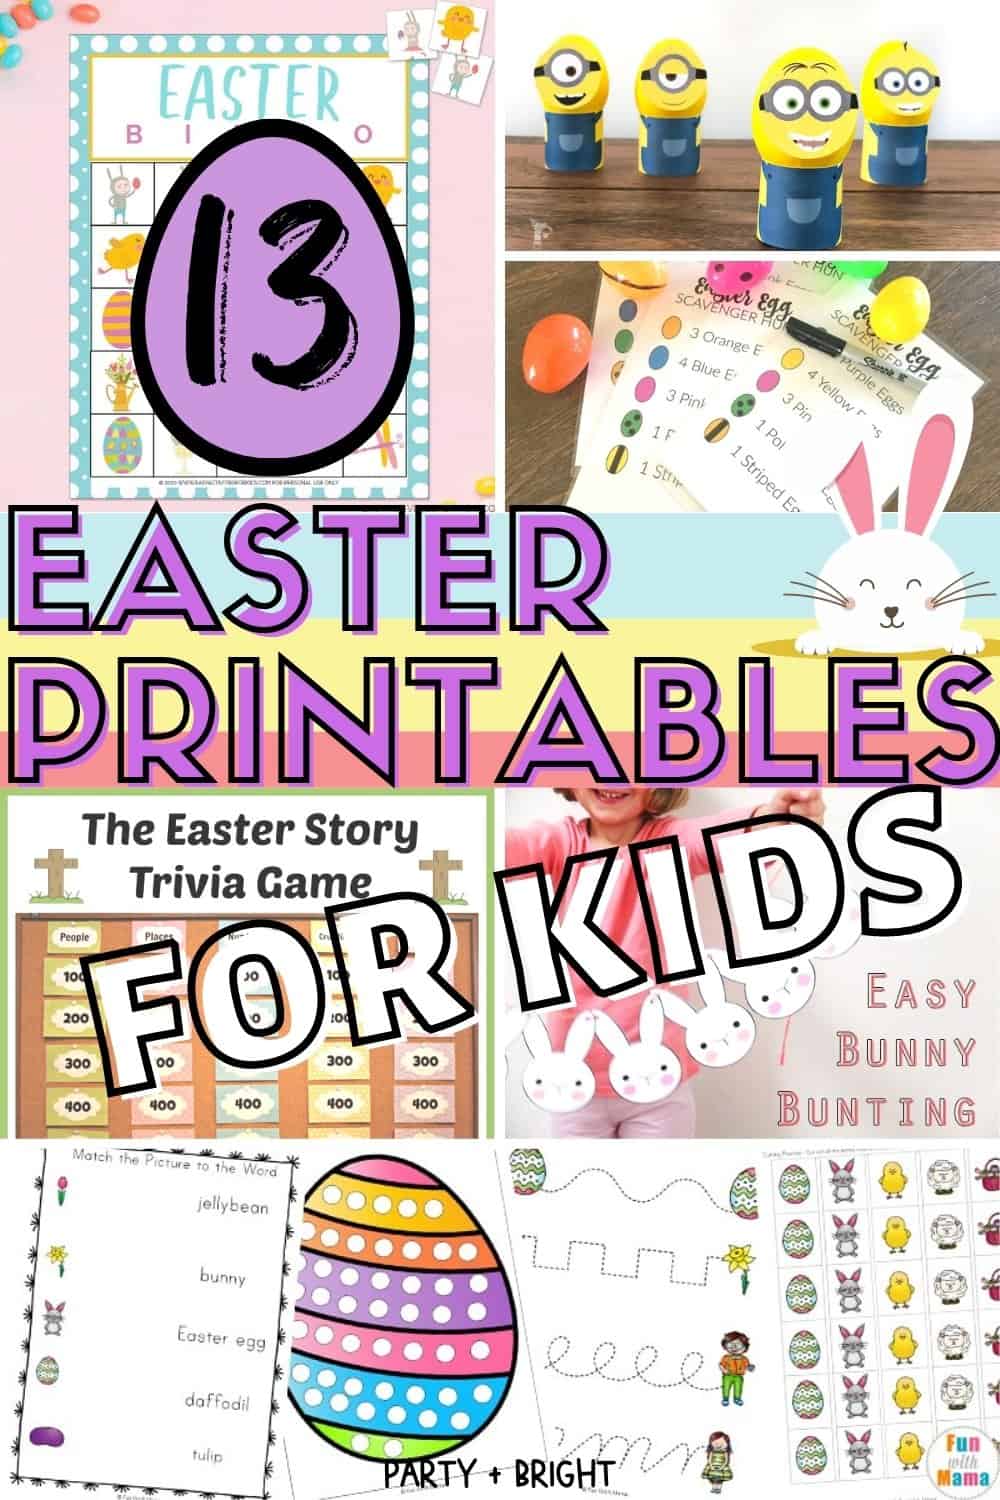 13 FUN Easter Printables for Kids (DIY Holiday Activities)